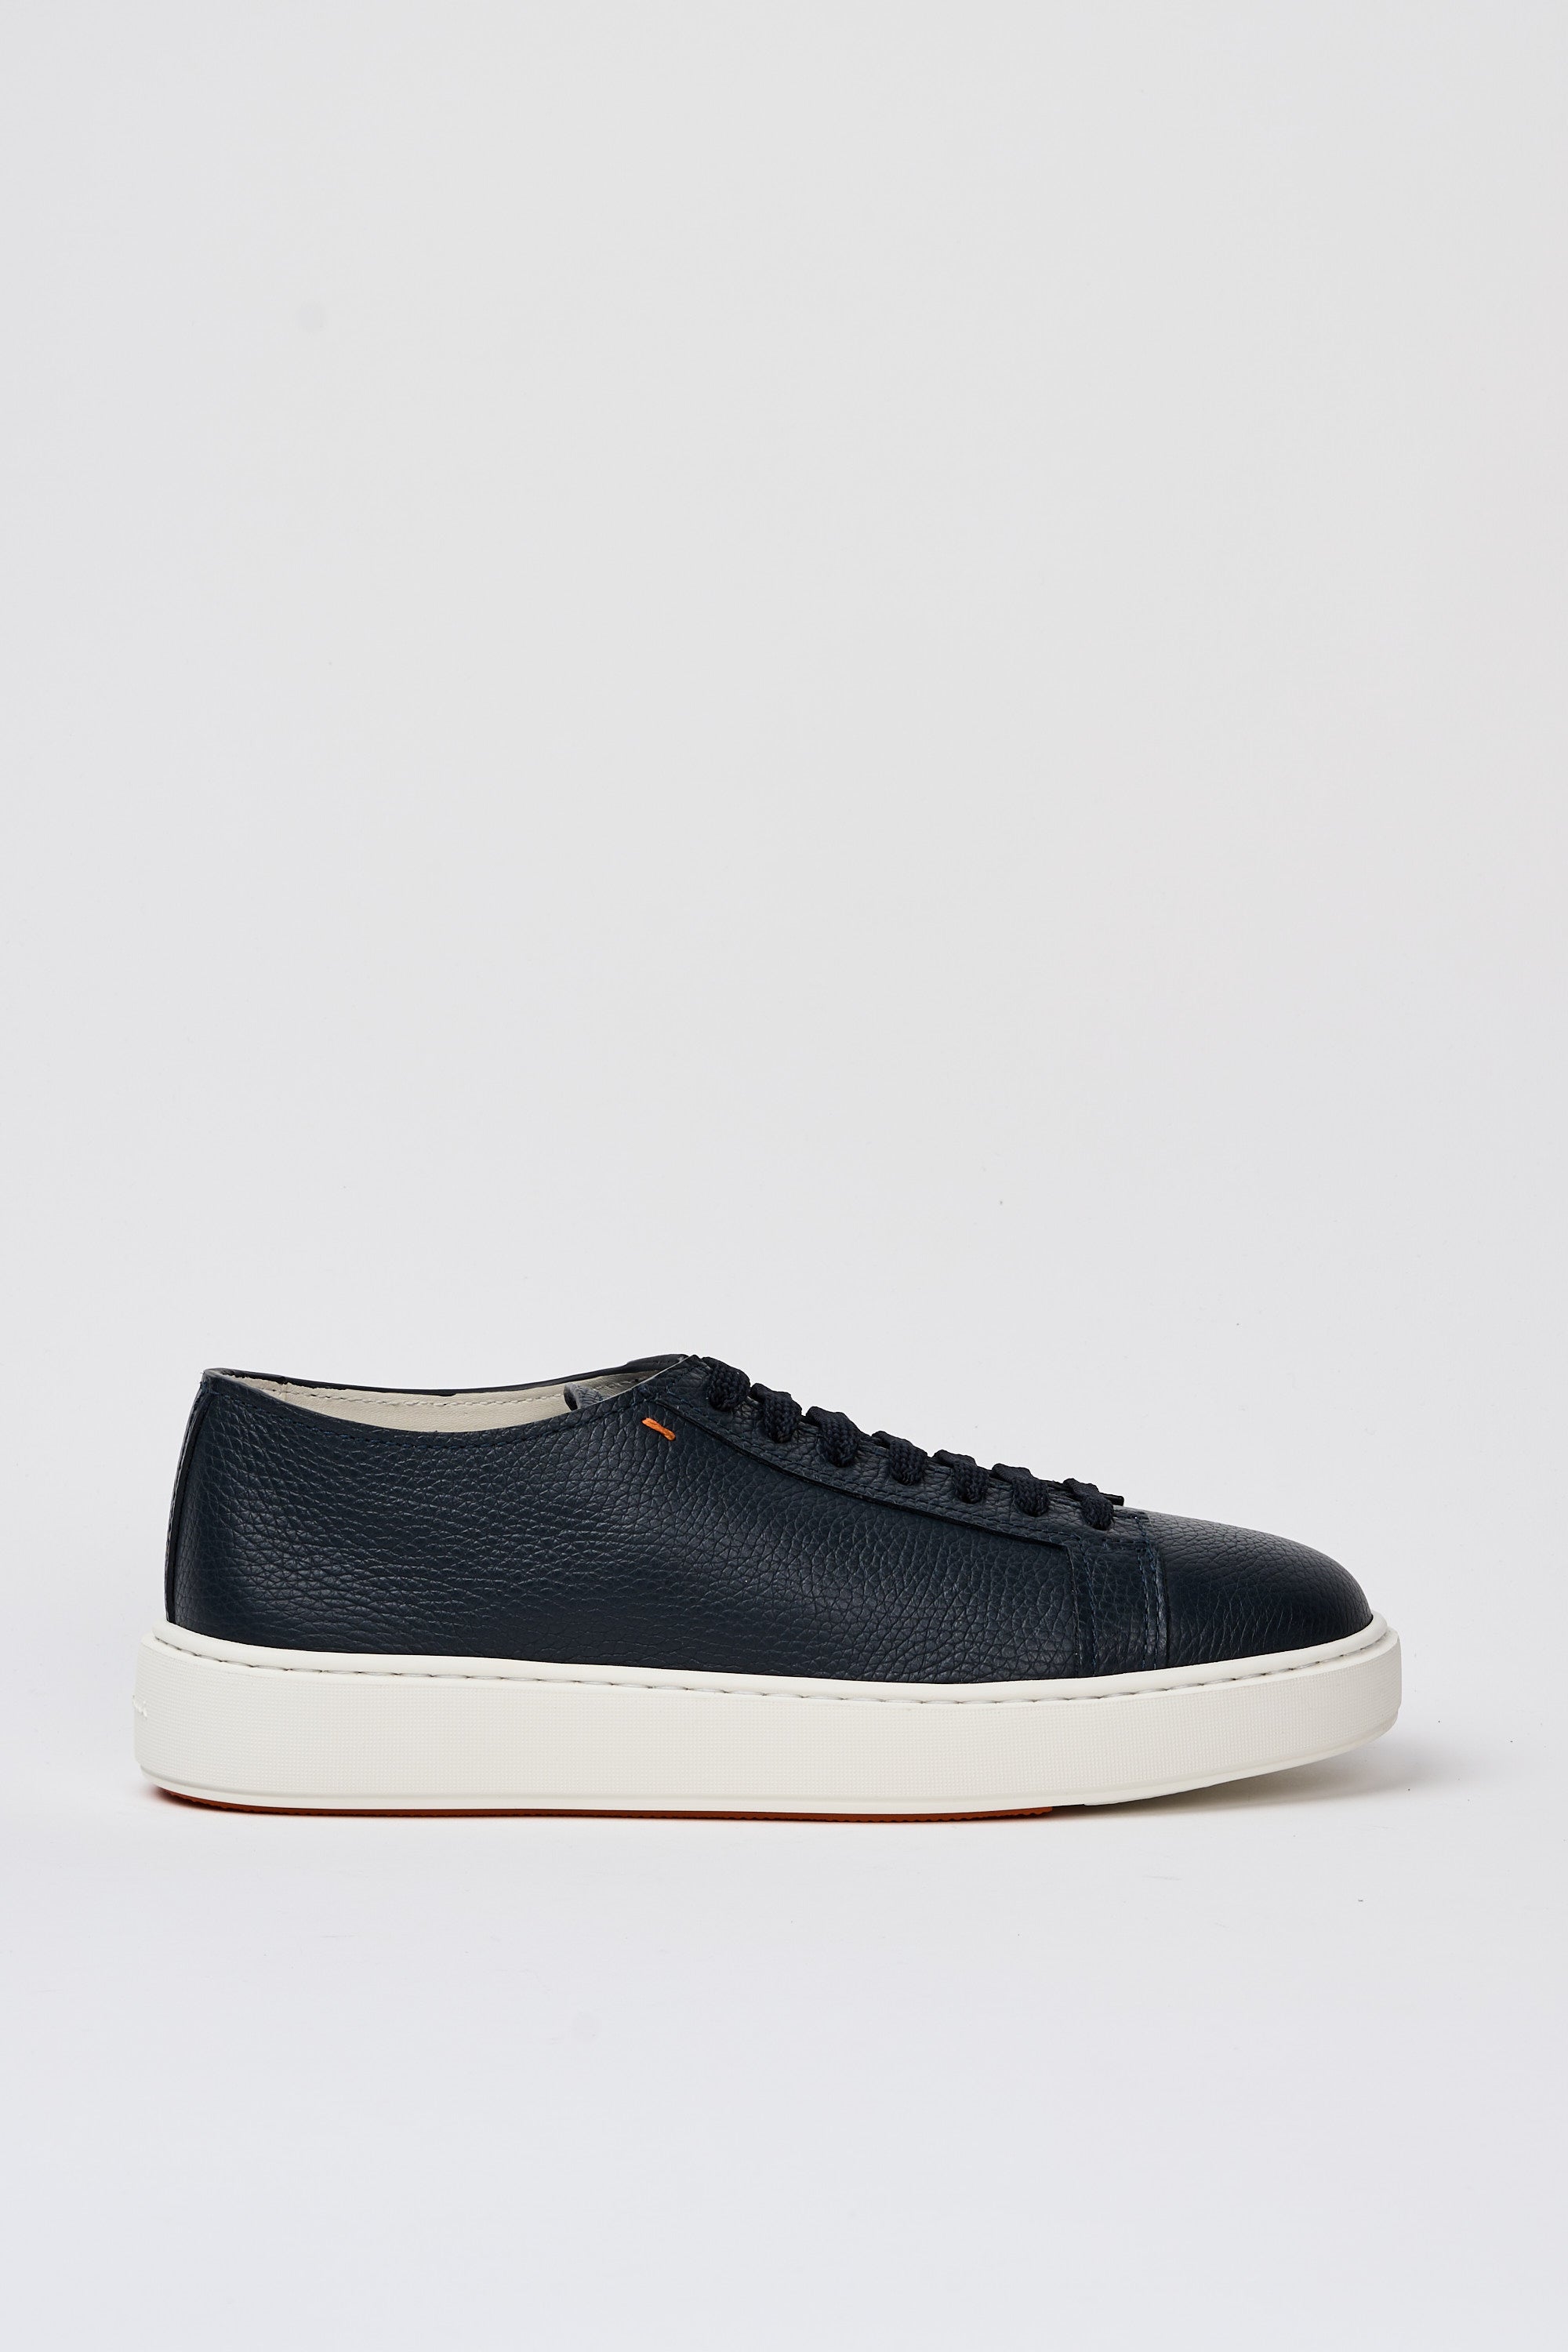 Santoni Tumbled Leather Sneakers in Blue-1